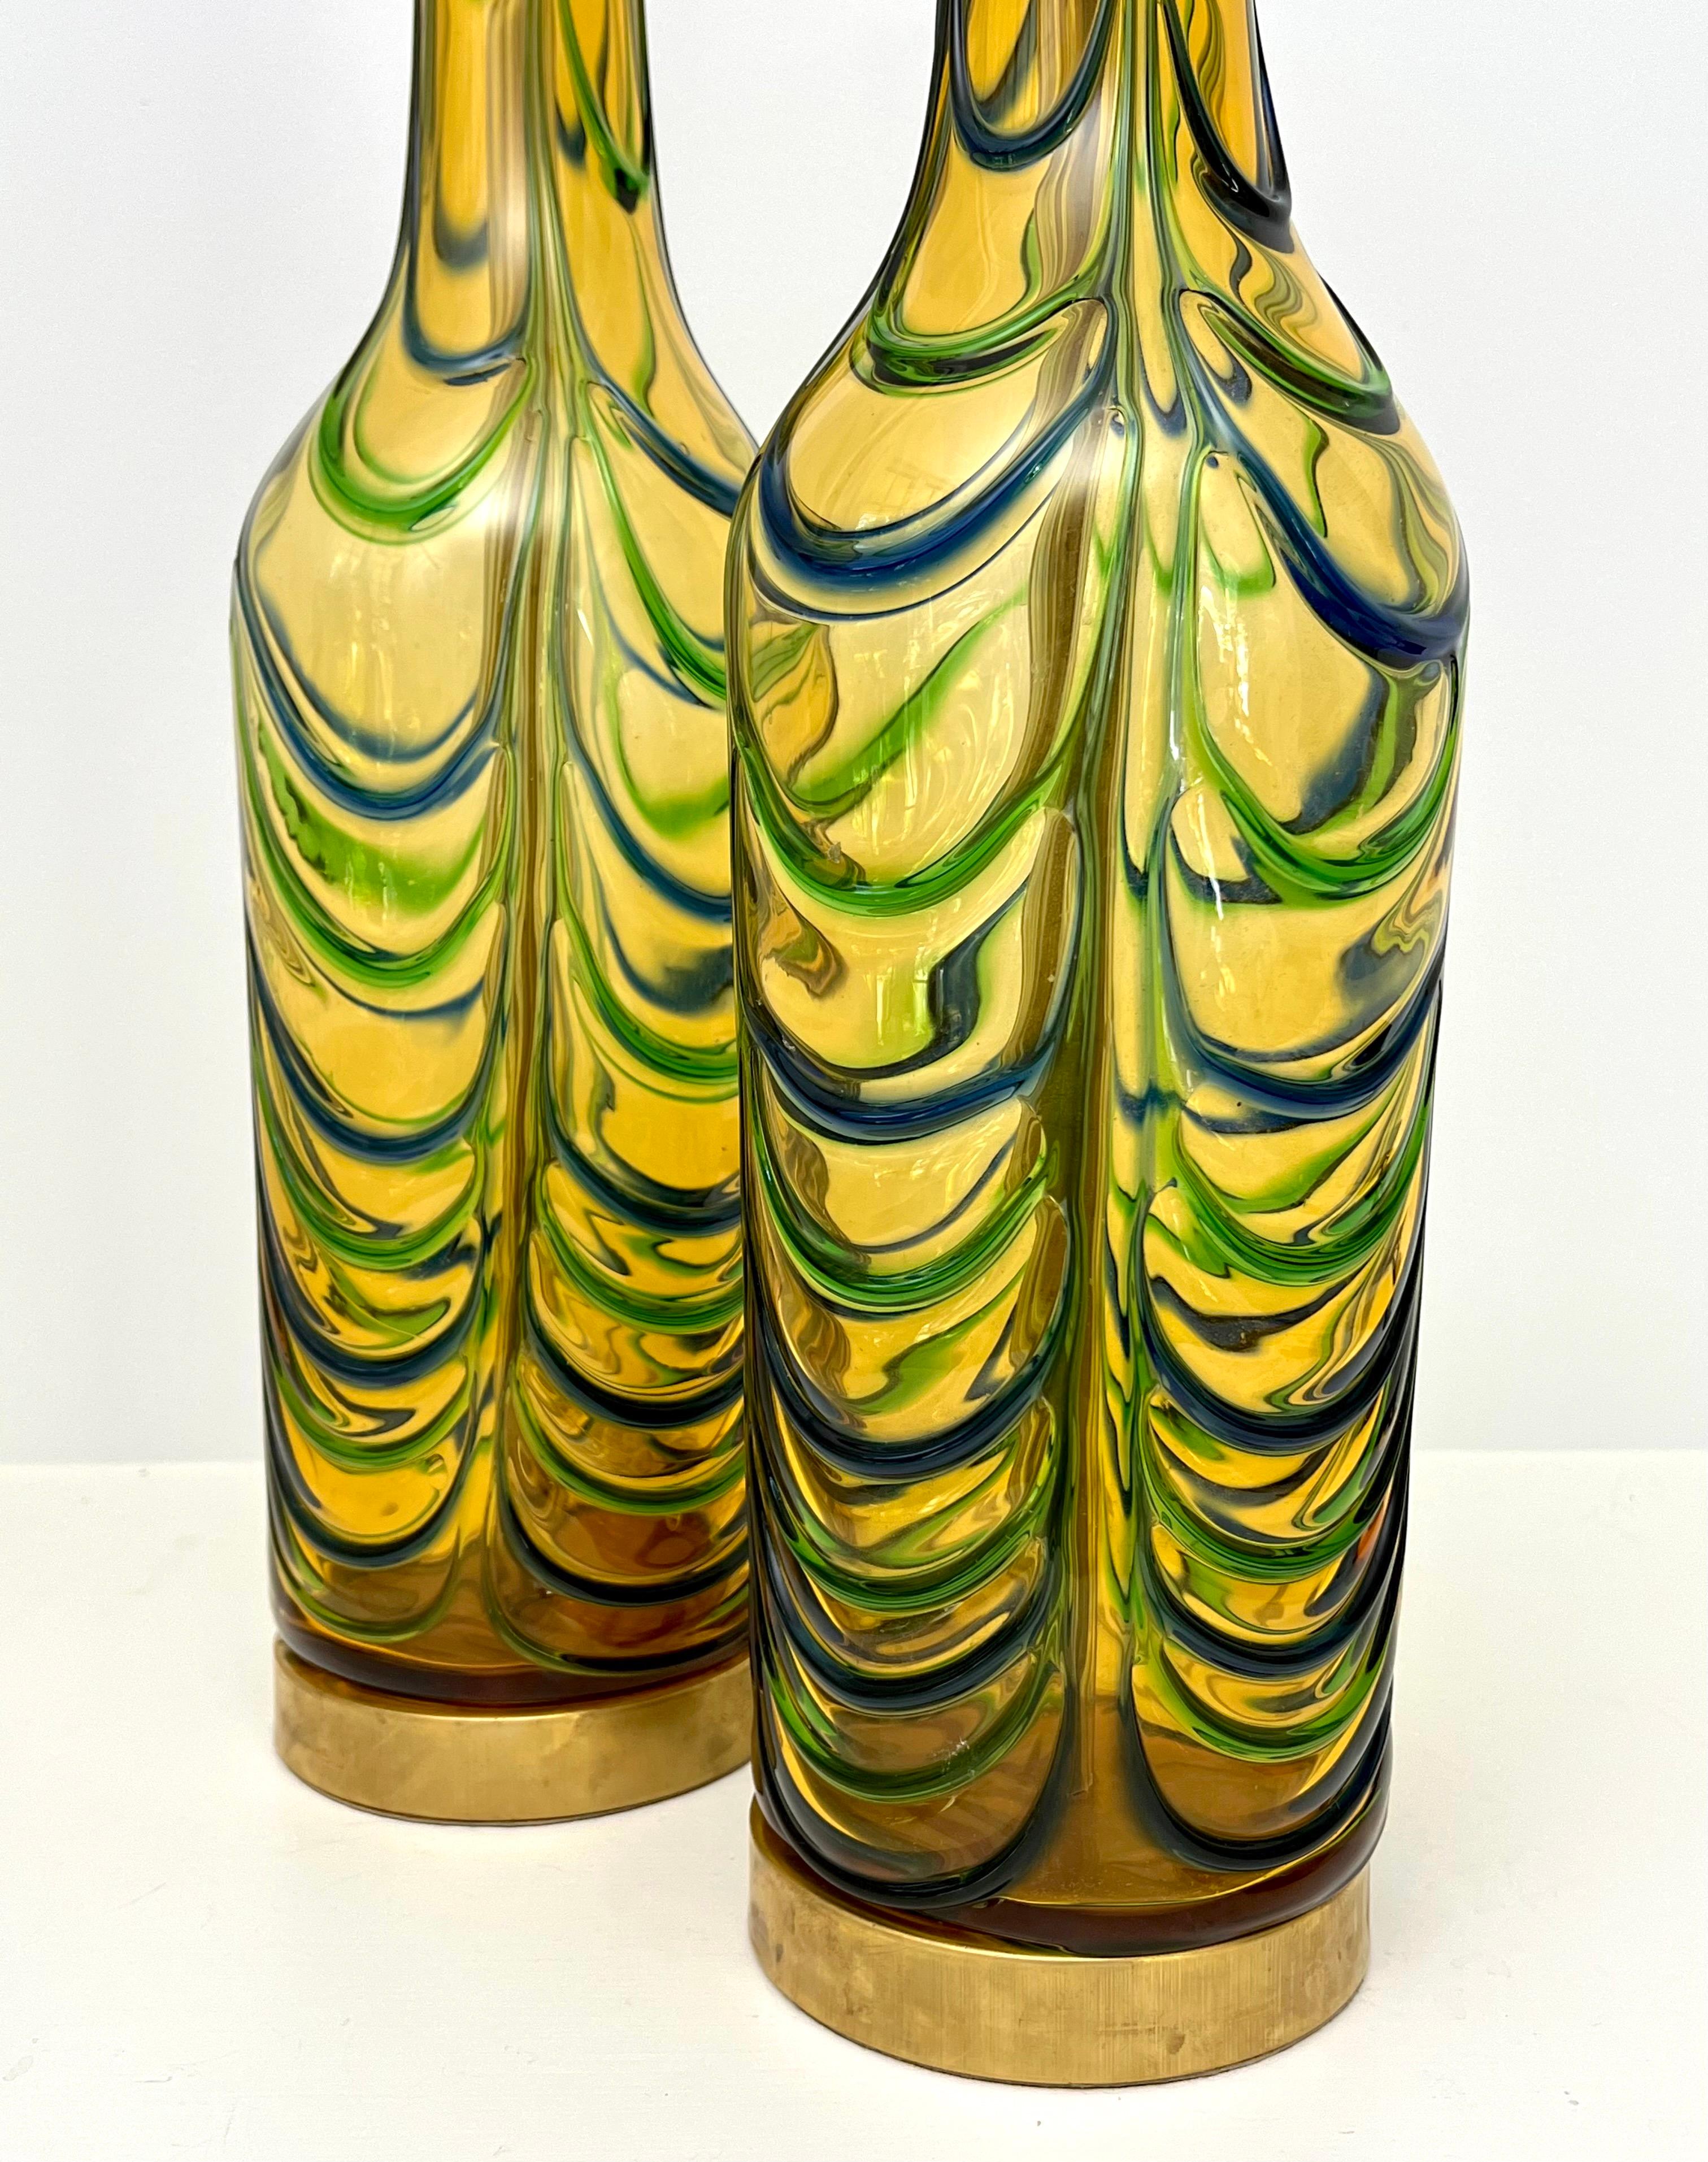 Stunning Pair of Mid Century Italian Murano bottle table lamps by Seguso. These are unique handblown lamps with blue and green waves on a yellowish gold background. A great transitional design for both modern and traditional decor with impressive